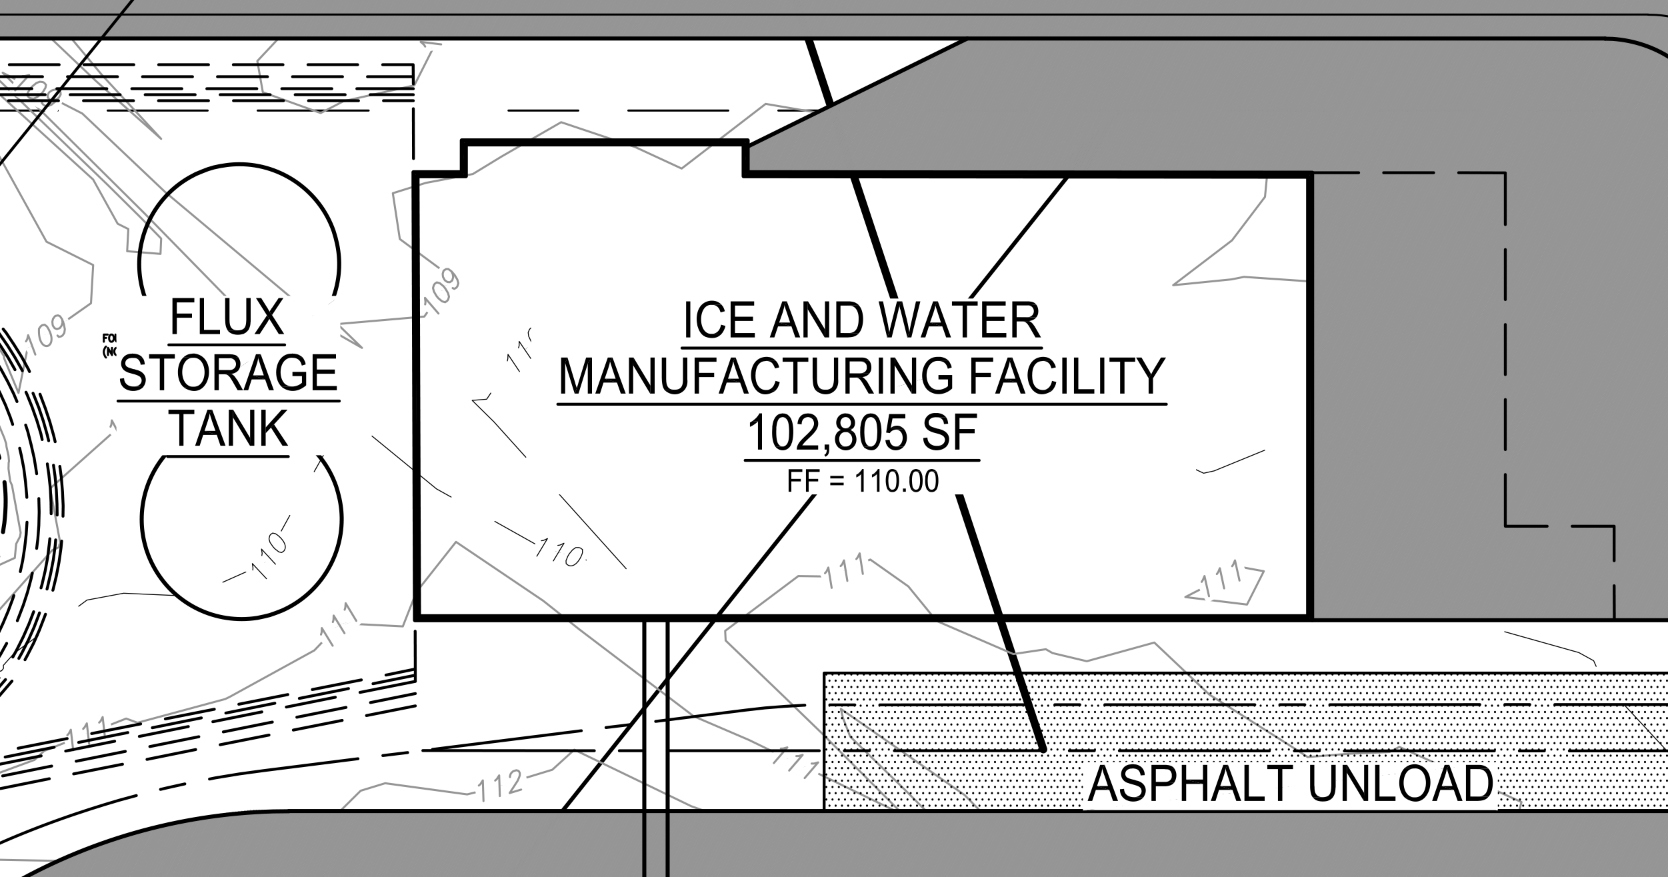 The conceptual site plan shows a 102,805-square-foot ice and water manufacturing facility.